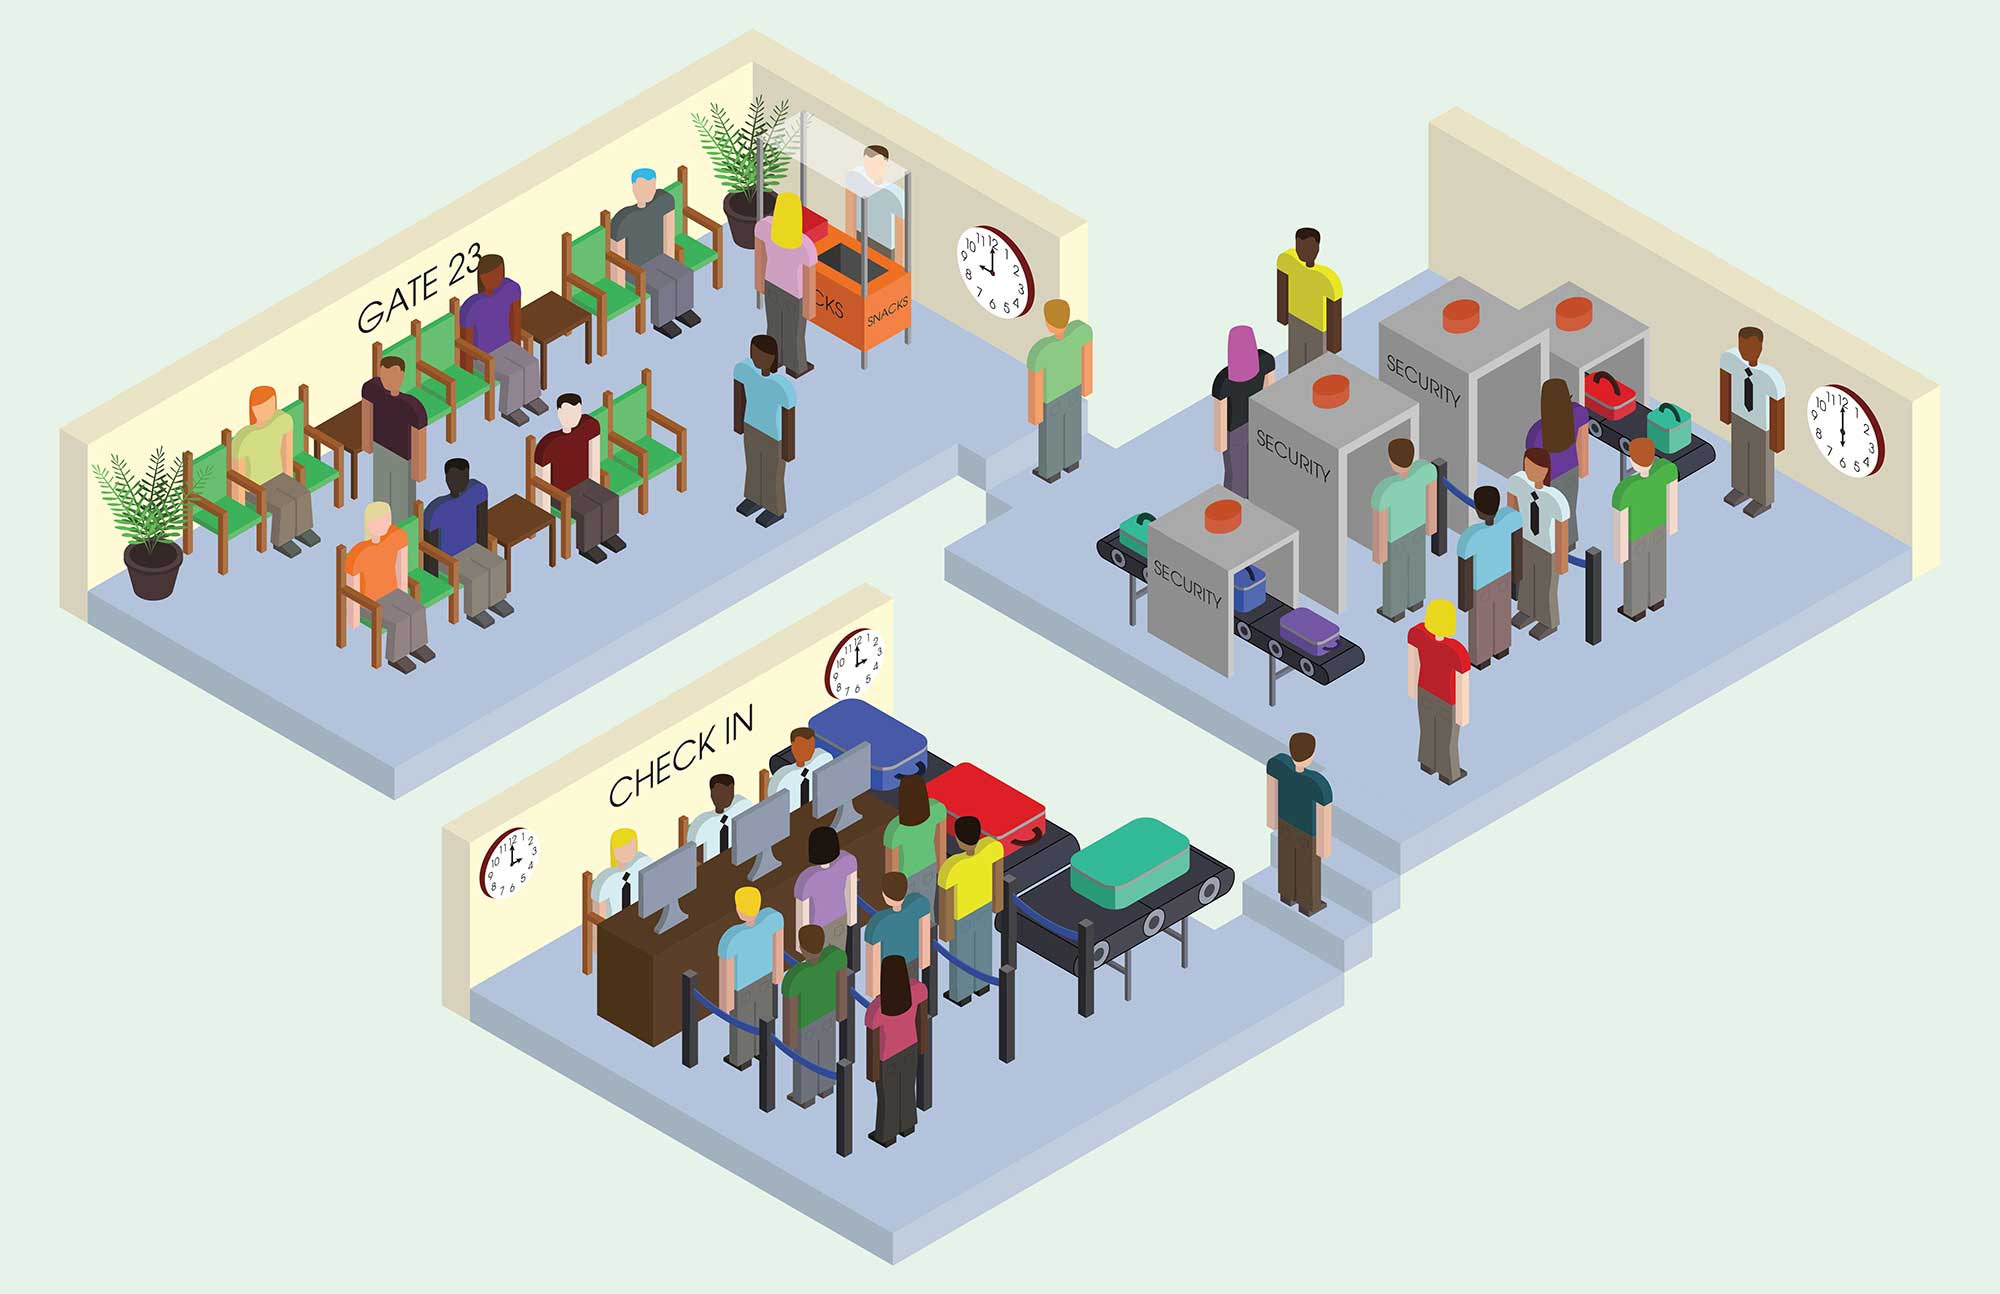 Isometric illustration showing the process of going through an airport.